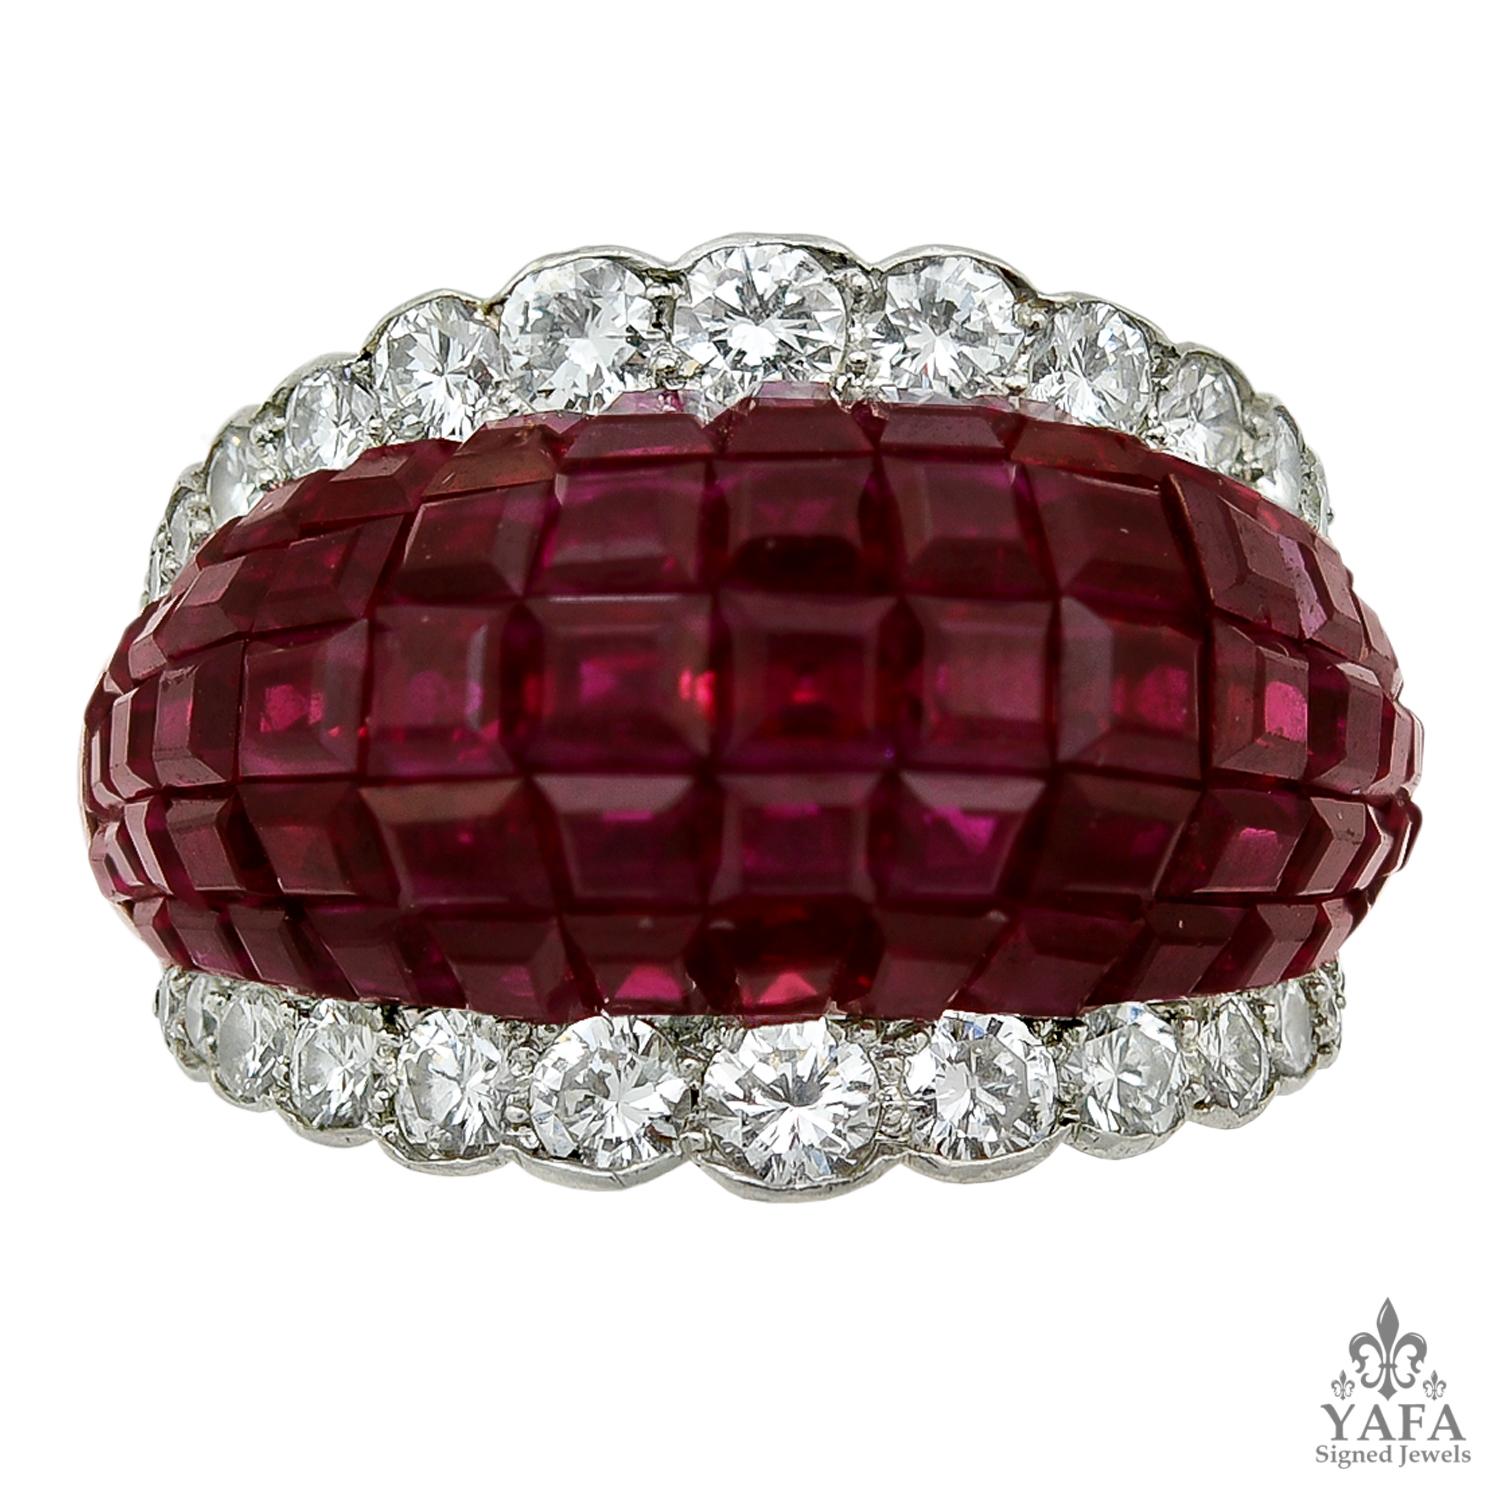 VAN CLEEF & ARPELS Vintage  Mystery-Set Ruby Platinum Dome Ring
Original Platinum mystery-set dome ring, set with ruby and brilliant-cut diamonds.
ring size- 5.75
signed “Van Cleef & Arpels“; circa 1960s